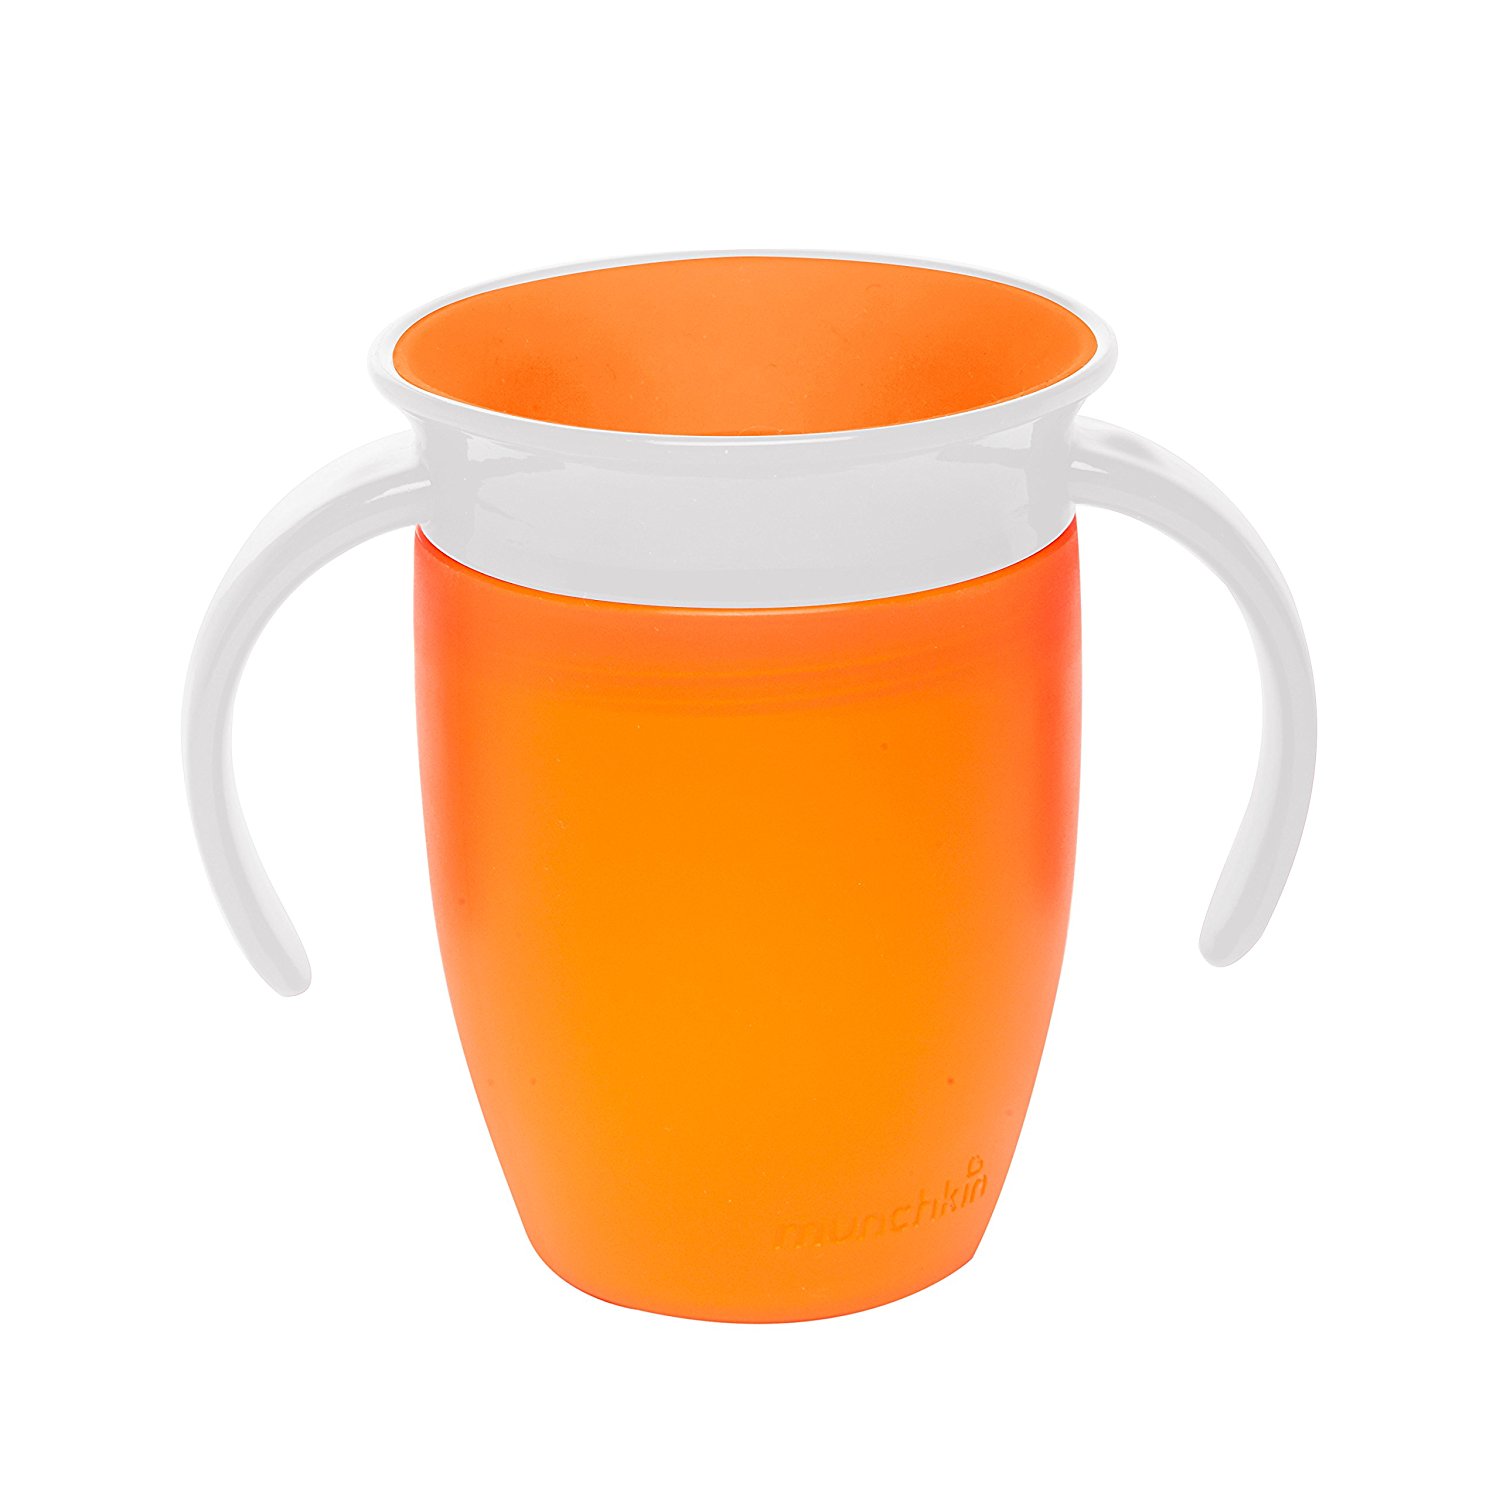 Munchkin Tasse Miracle 360ᵒ D Apprentissage Pour Bebe Orange 7ml Cooking For My Baby